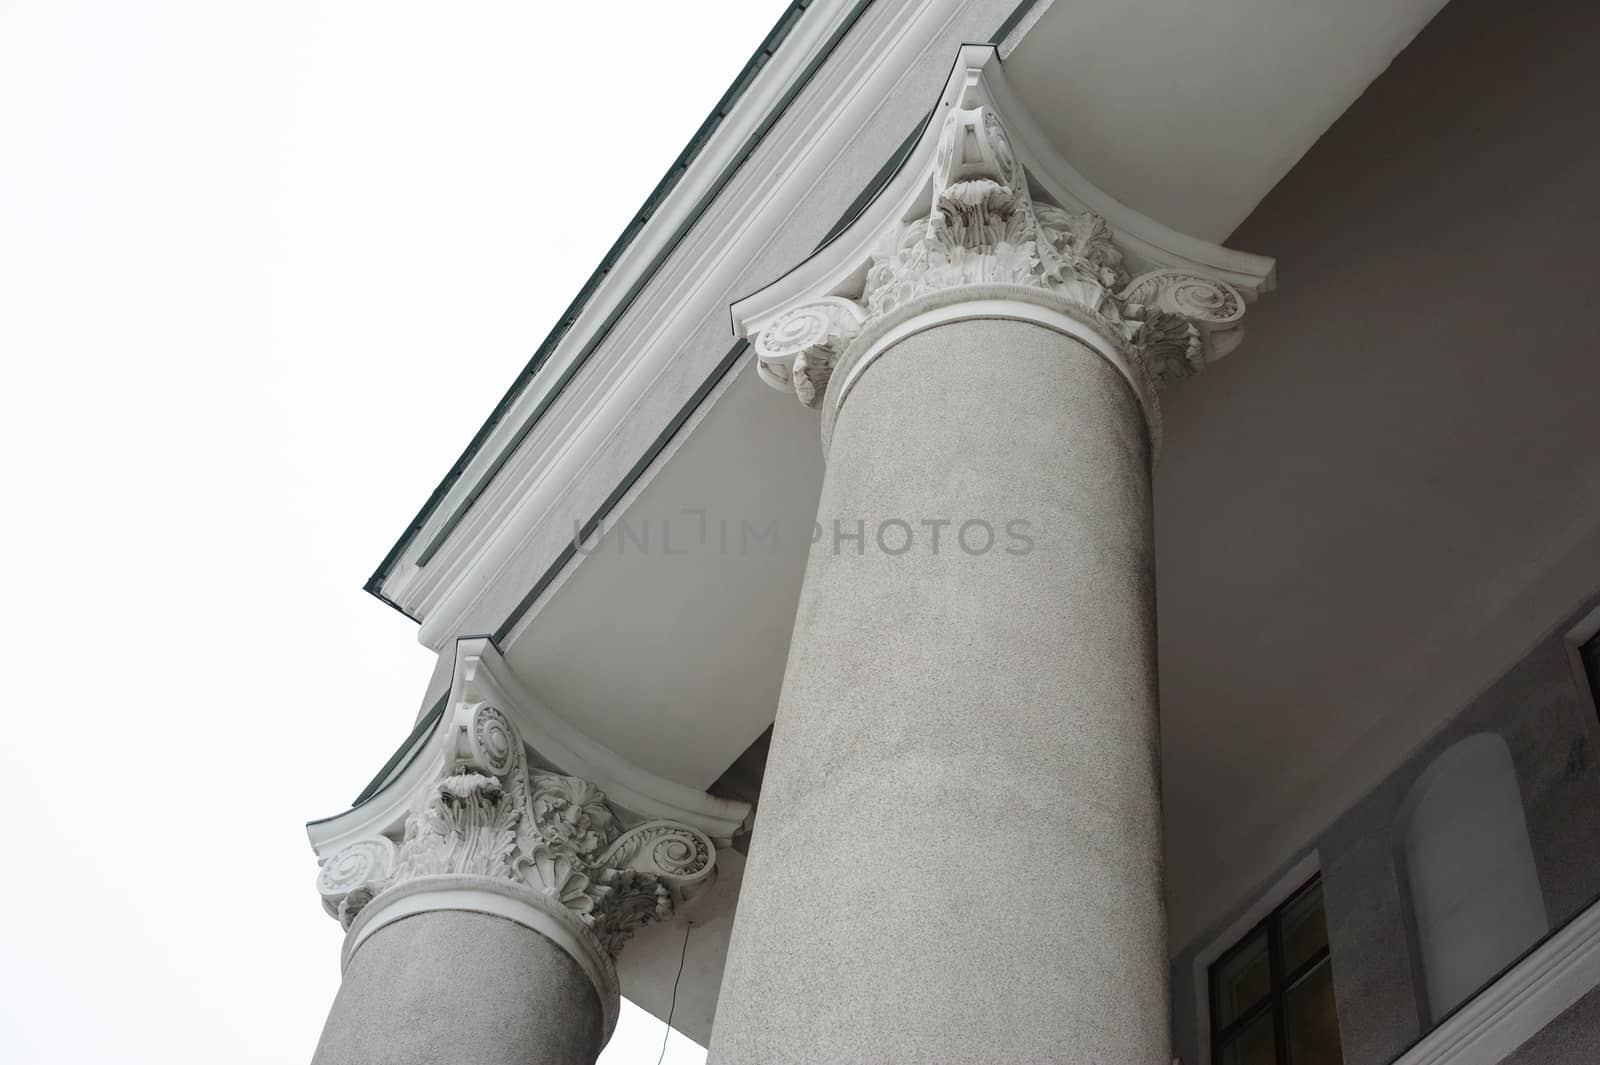 columns on the facade of the building by timonko